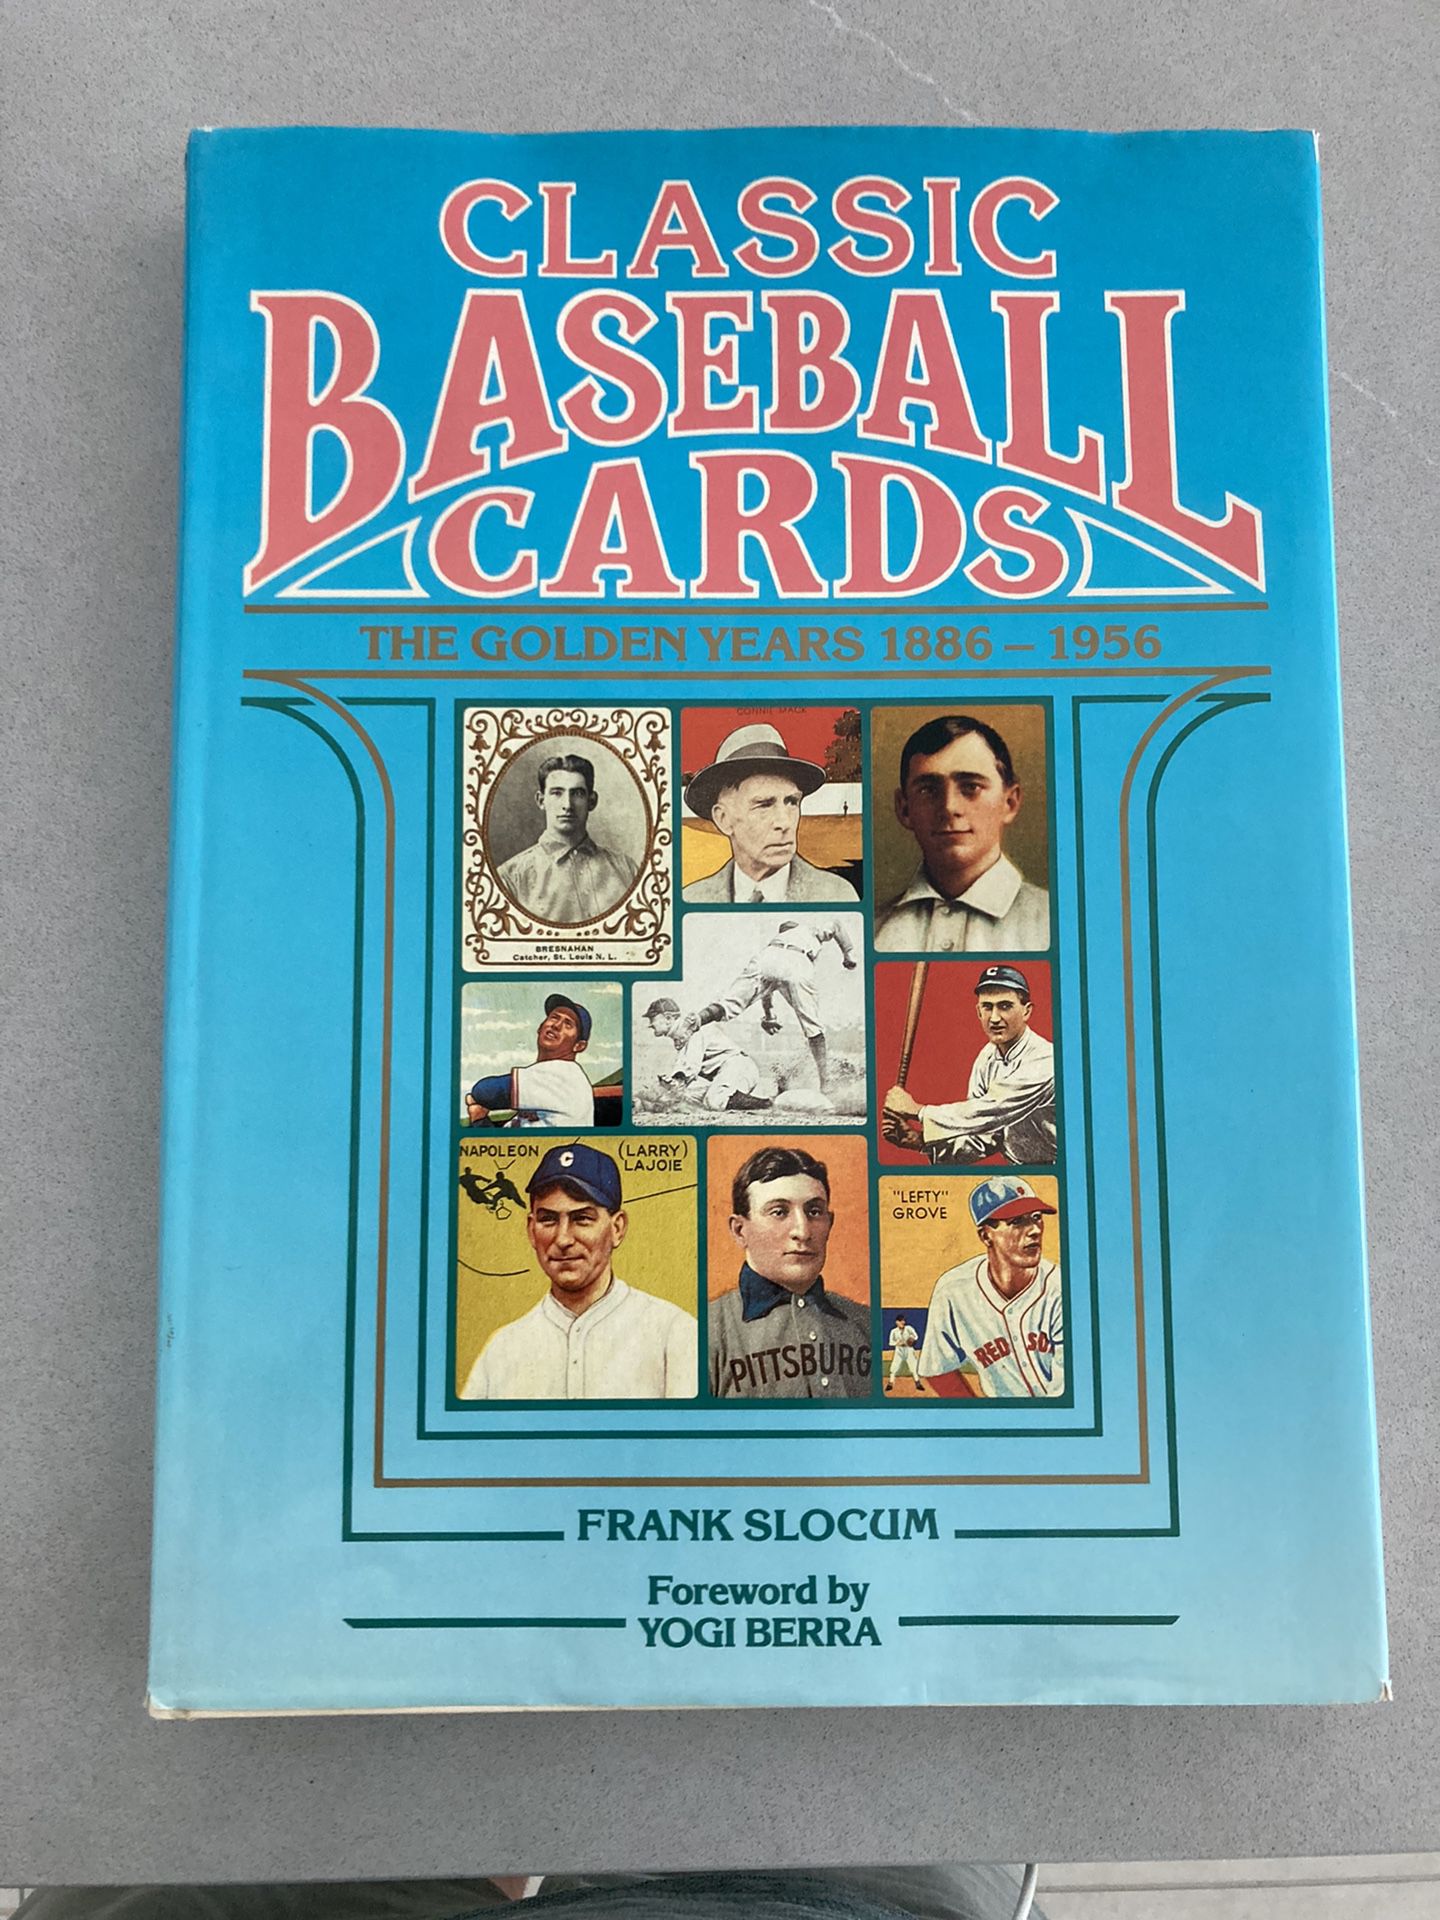 Classic Baseball Cards “The Golden Years” 